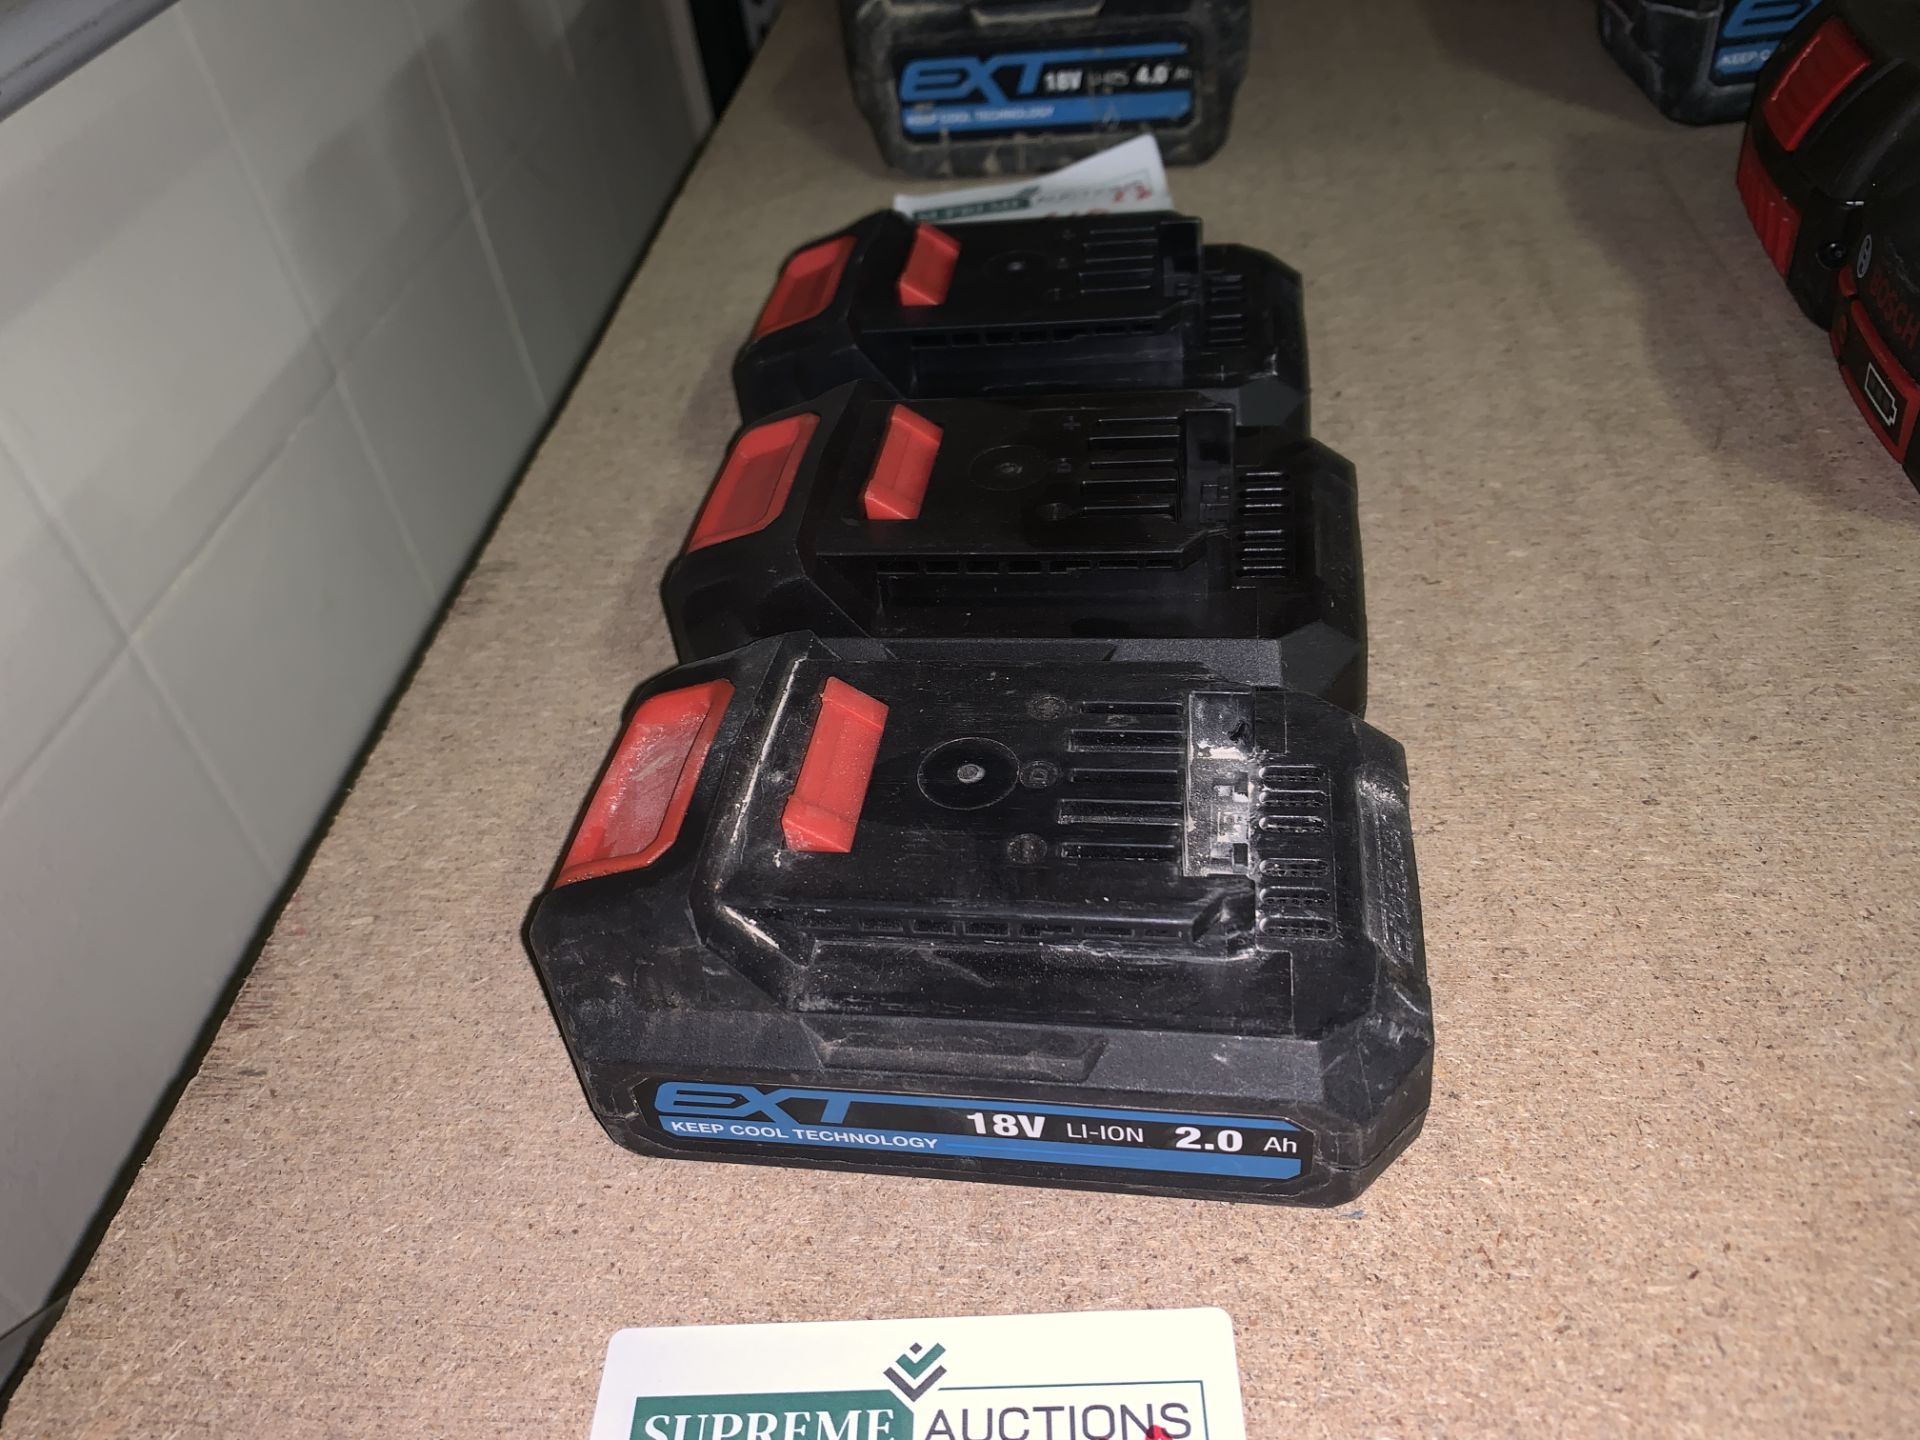 3 X ERBAUER 18V 2.0AH BATTERIES (UNCHECKED, UNTESTED)